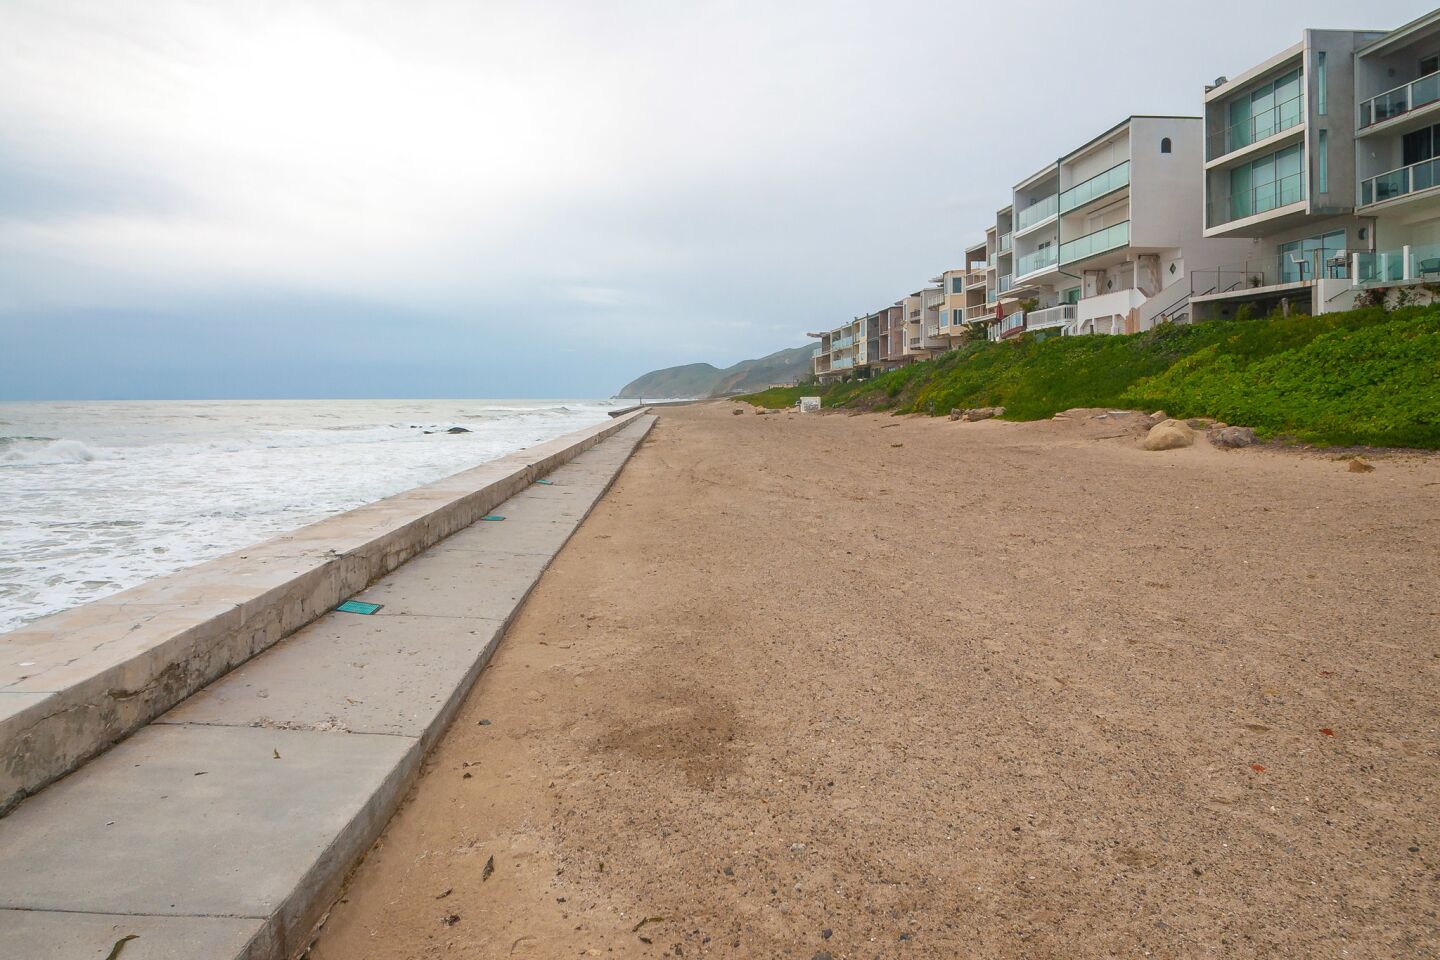 The two-story condo in Malibu takes in panoramic ocean views.